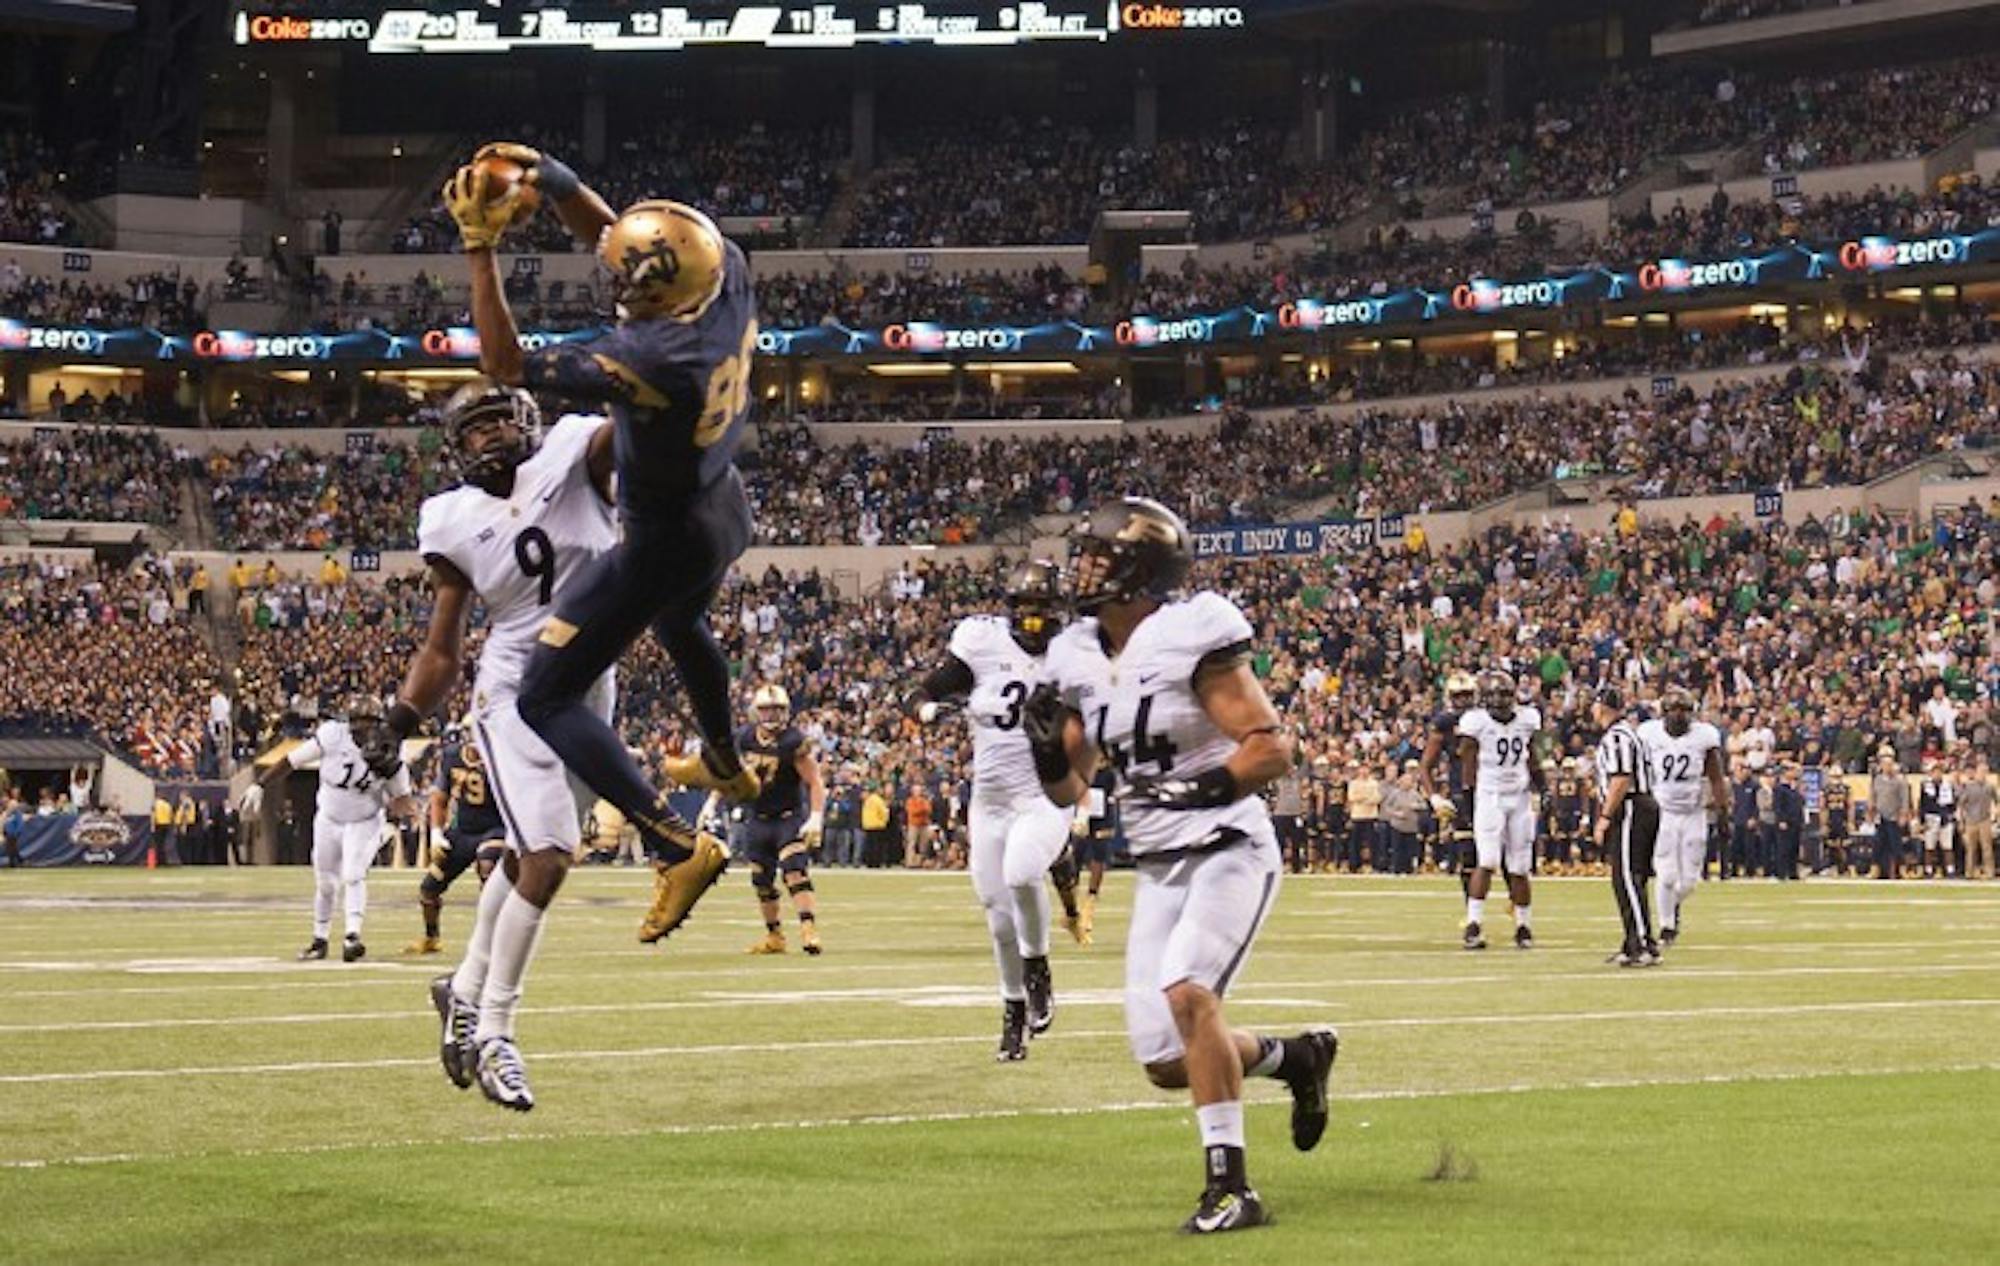 Sophomore wide receiver Corey Robinson hauls in a touchdown during Notre Dame's 30-14 victory over Purdue on Saturday.